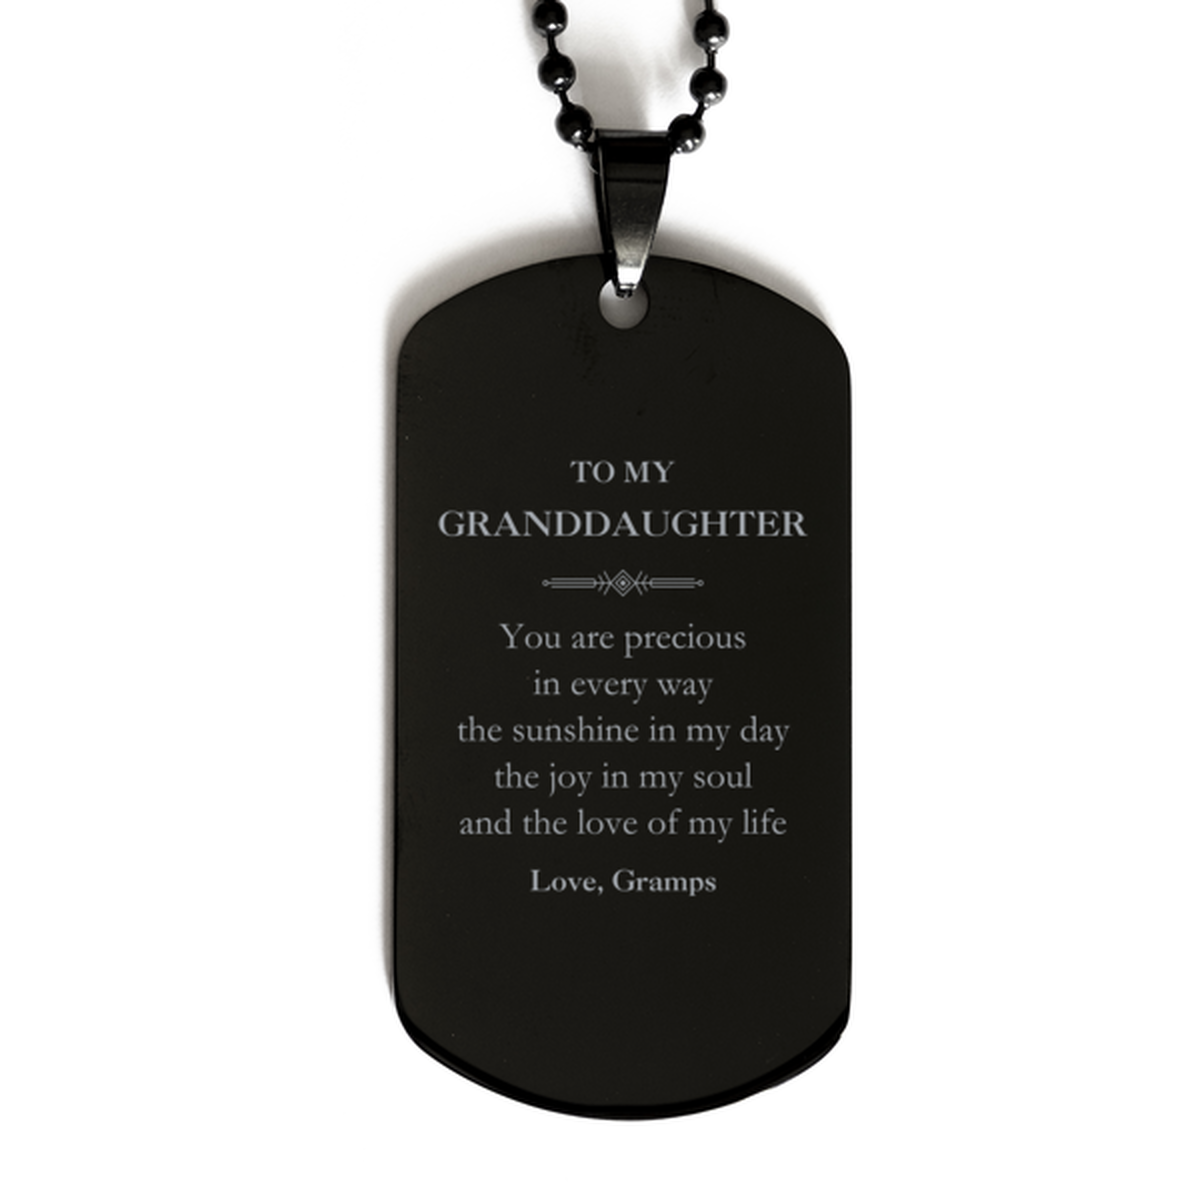 Graduation Gifts for Granddaughter Black Dog Tag Present from Gramps, Christmas Granddaughter Birthday Gifts Granddaughter You are precious in every way the sunshine in my day. Love, Gramps